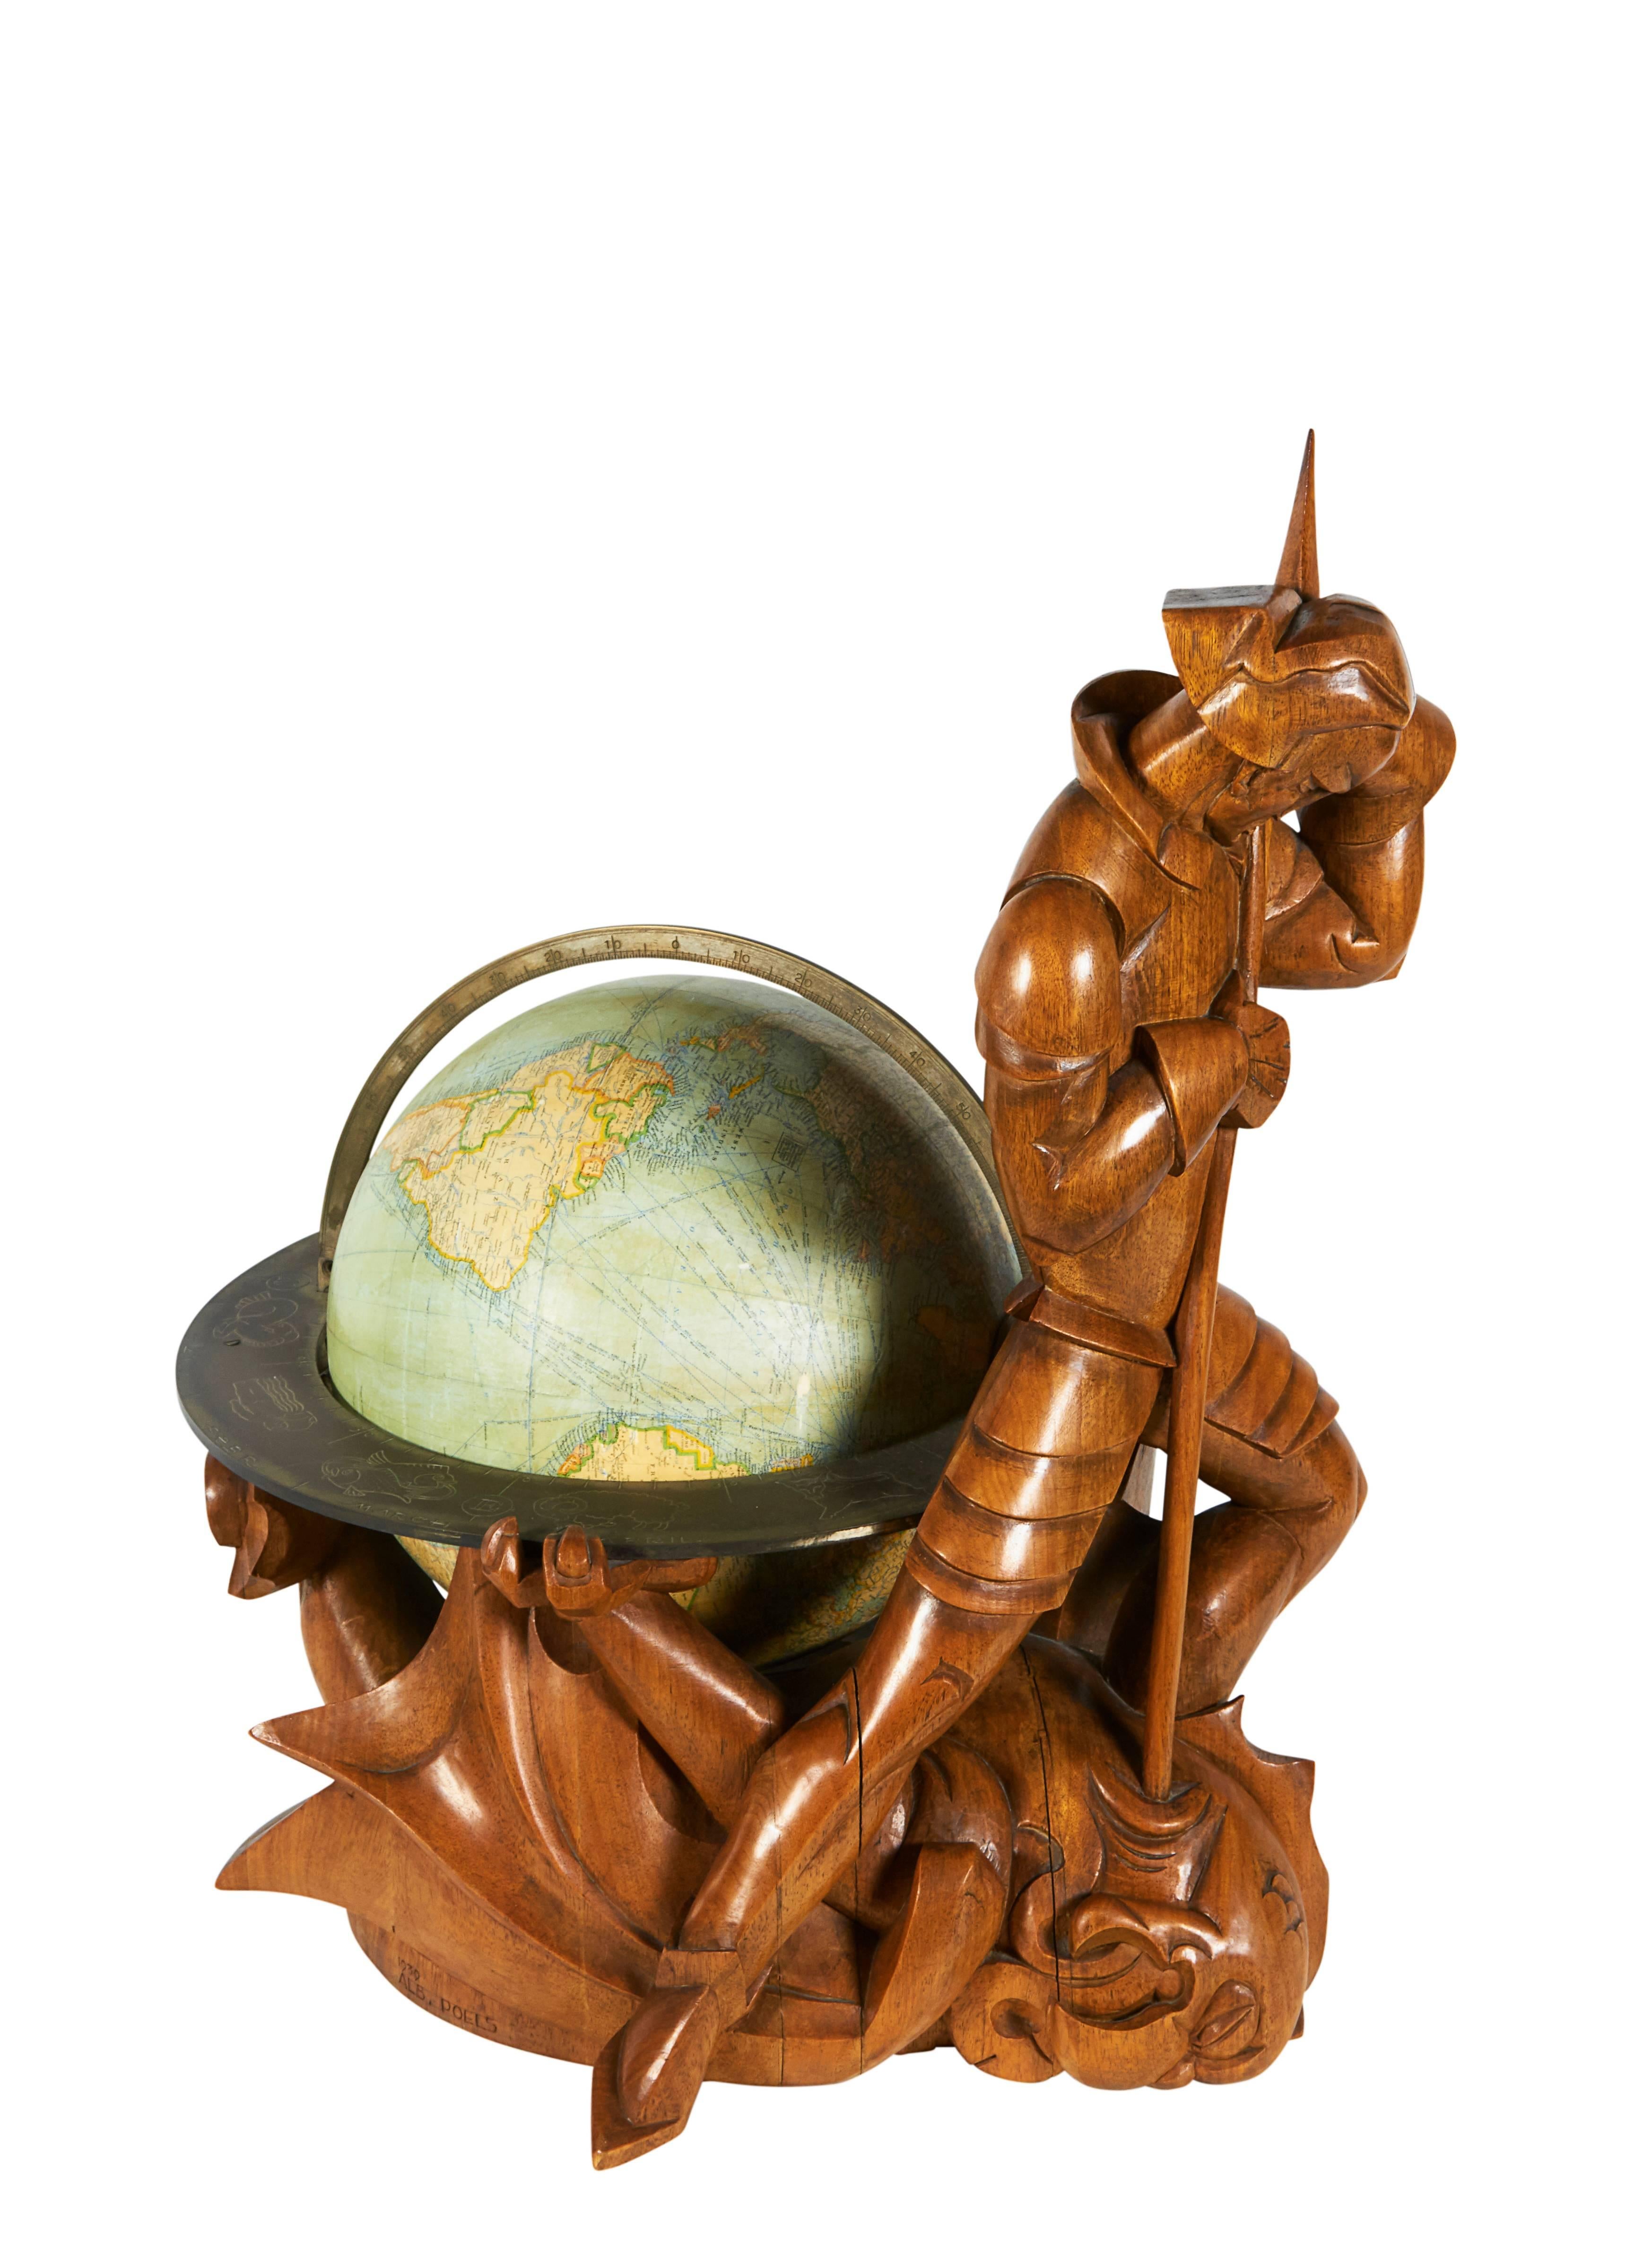 Sculptural globe of St. George and the dragon with zodiac signs. Signed and dated. Provenance: Collection of Jerome Shaw, Florida; Historical Design Inc., New York; 1939 World's Fair, New York.